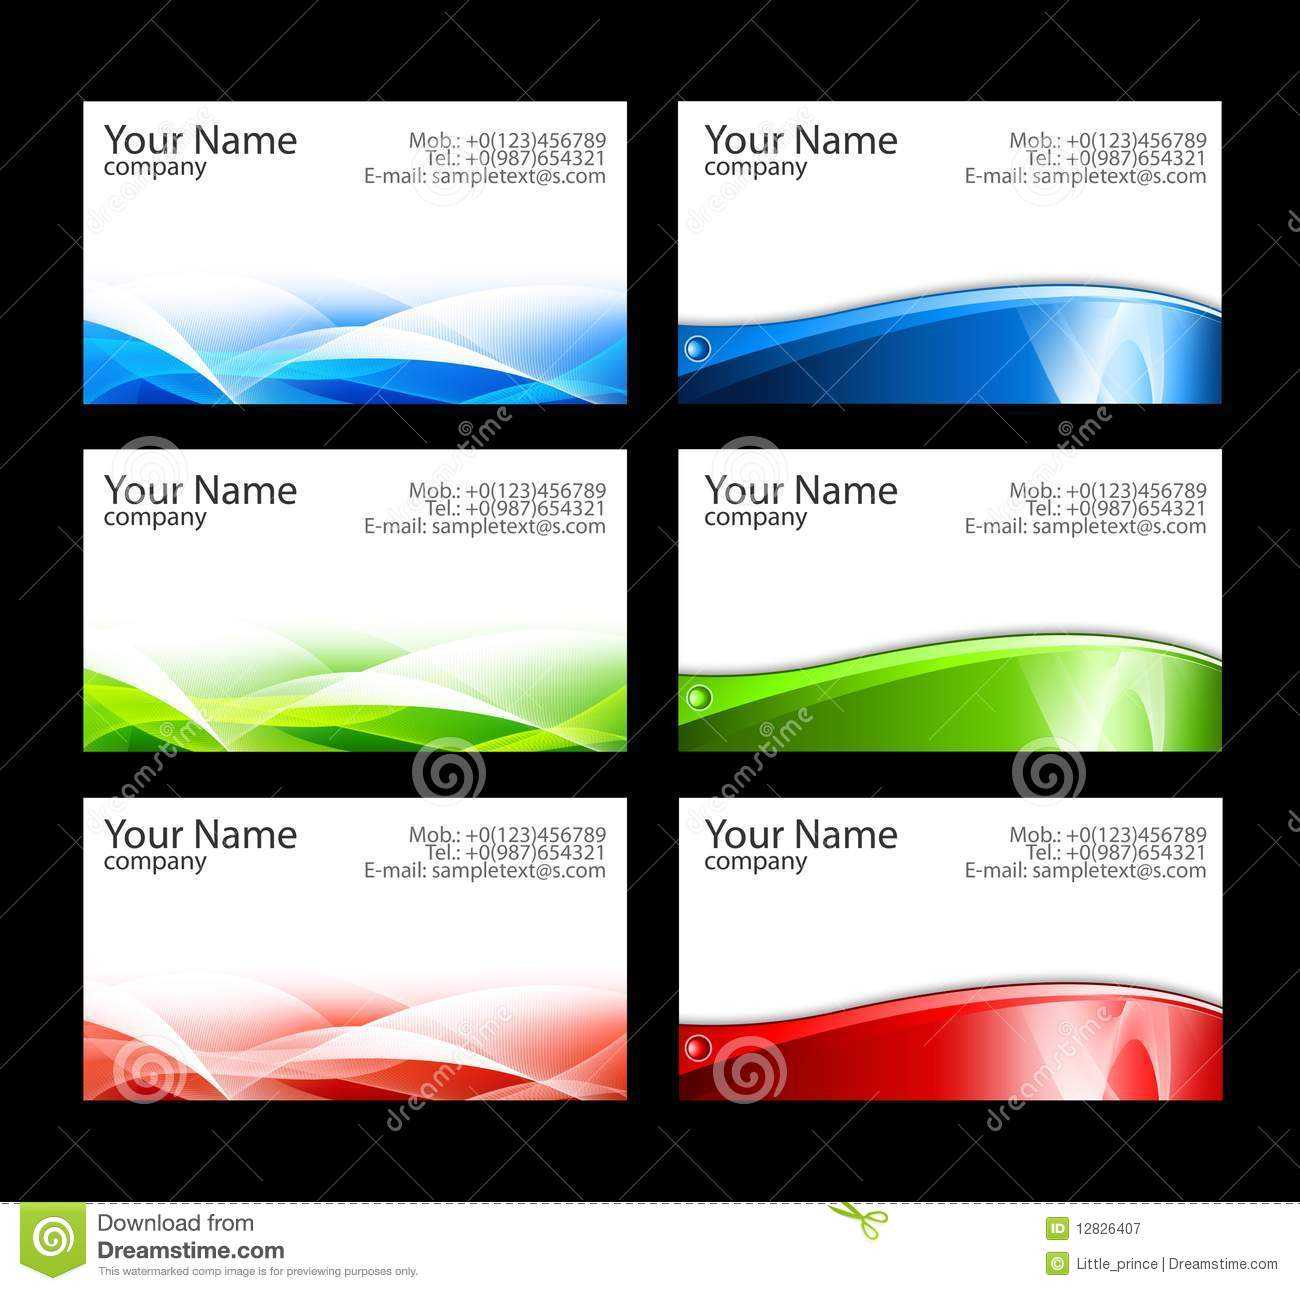 Business Cards Templates Stock Illustration. Illustration Of In Microsoft Templates For Business Cards